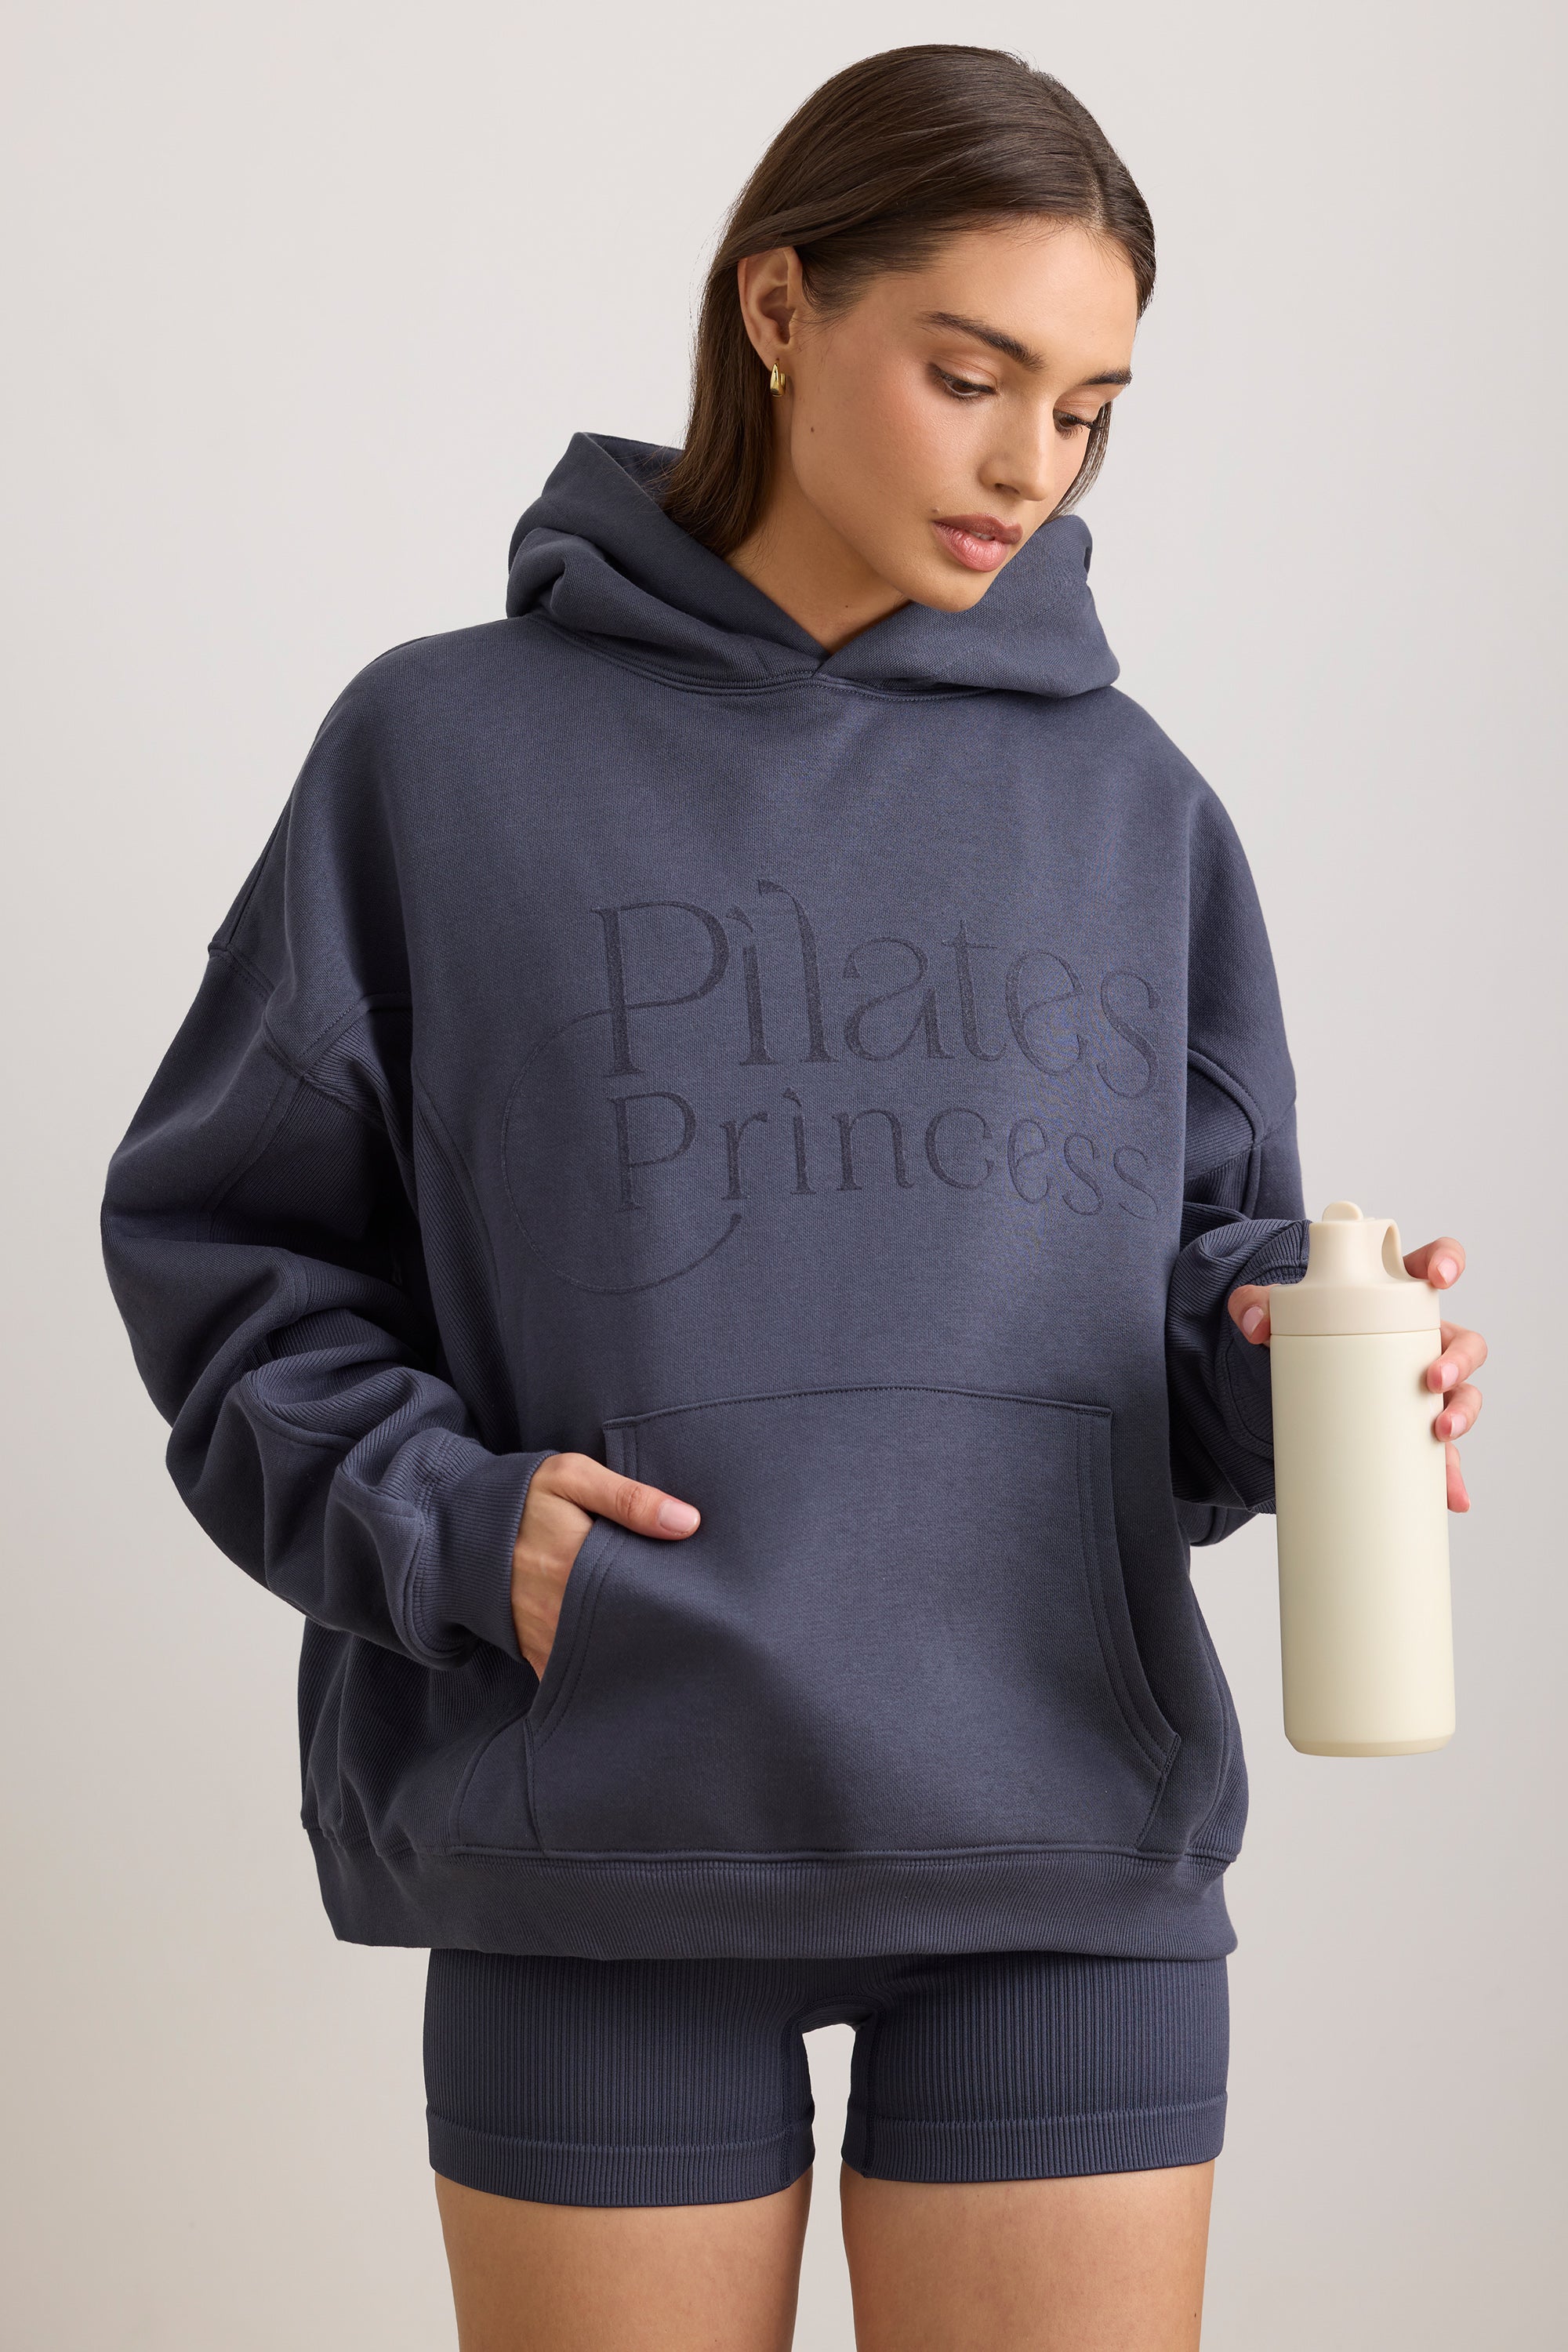 Pilates Pilates  Pullover Hoodie for Sale by joabaj